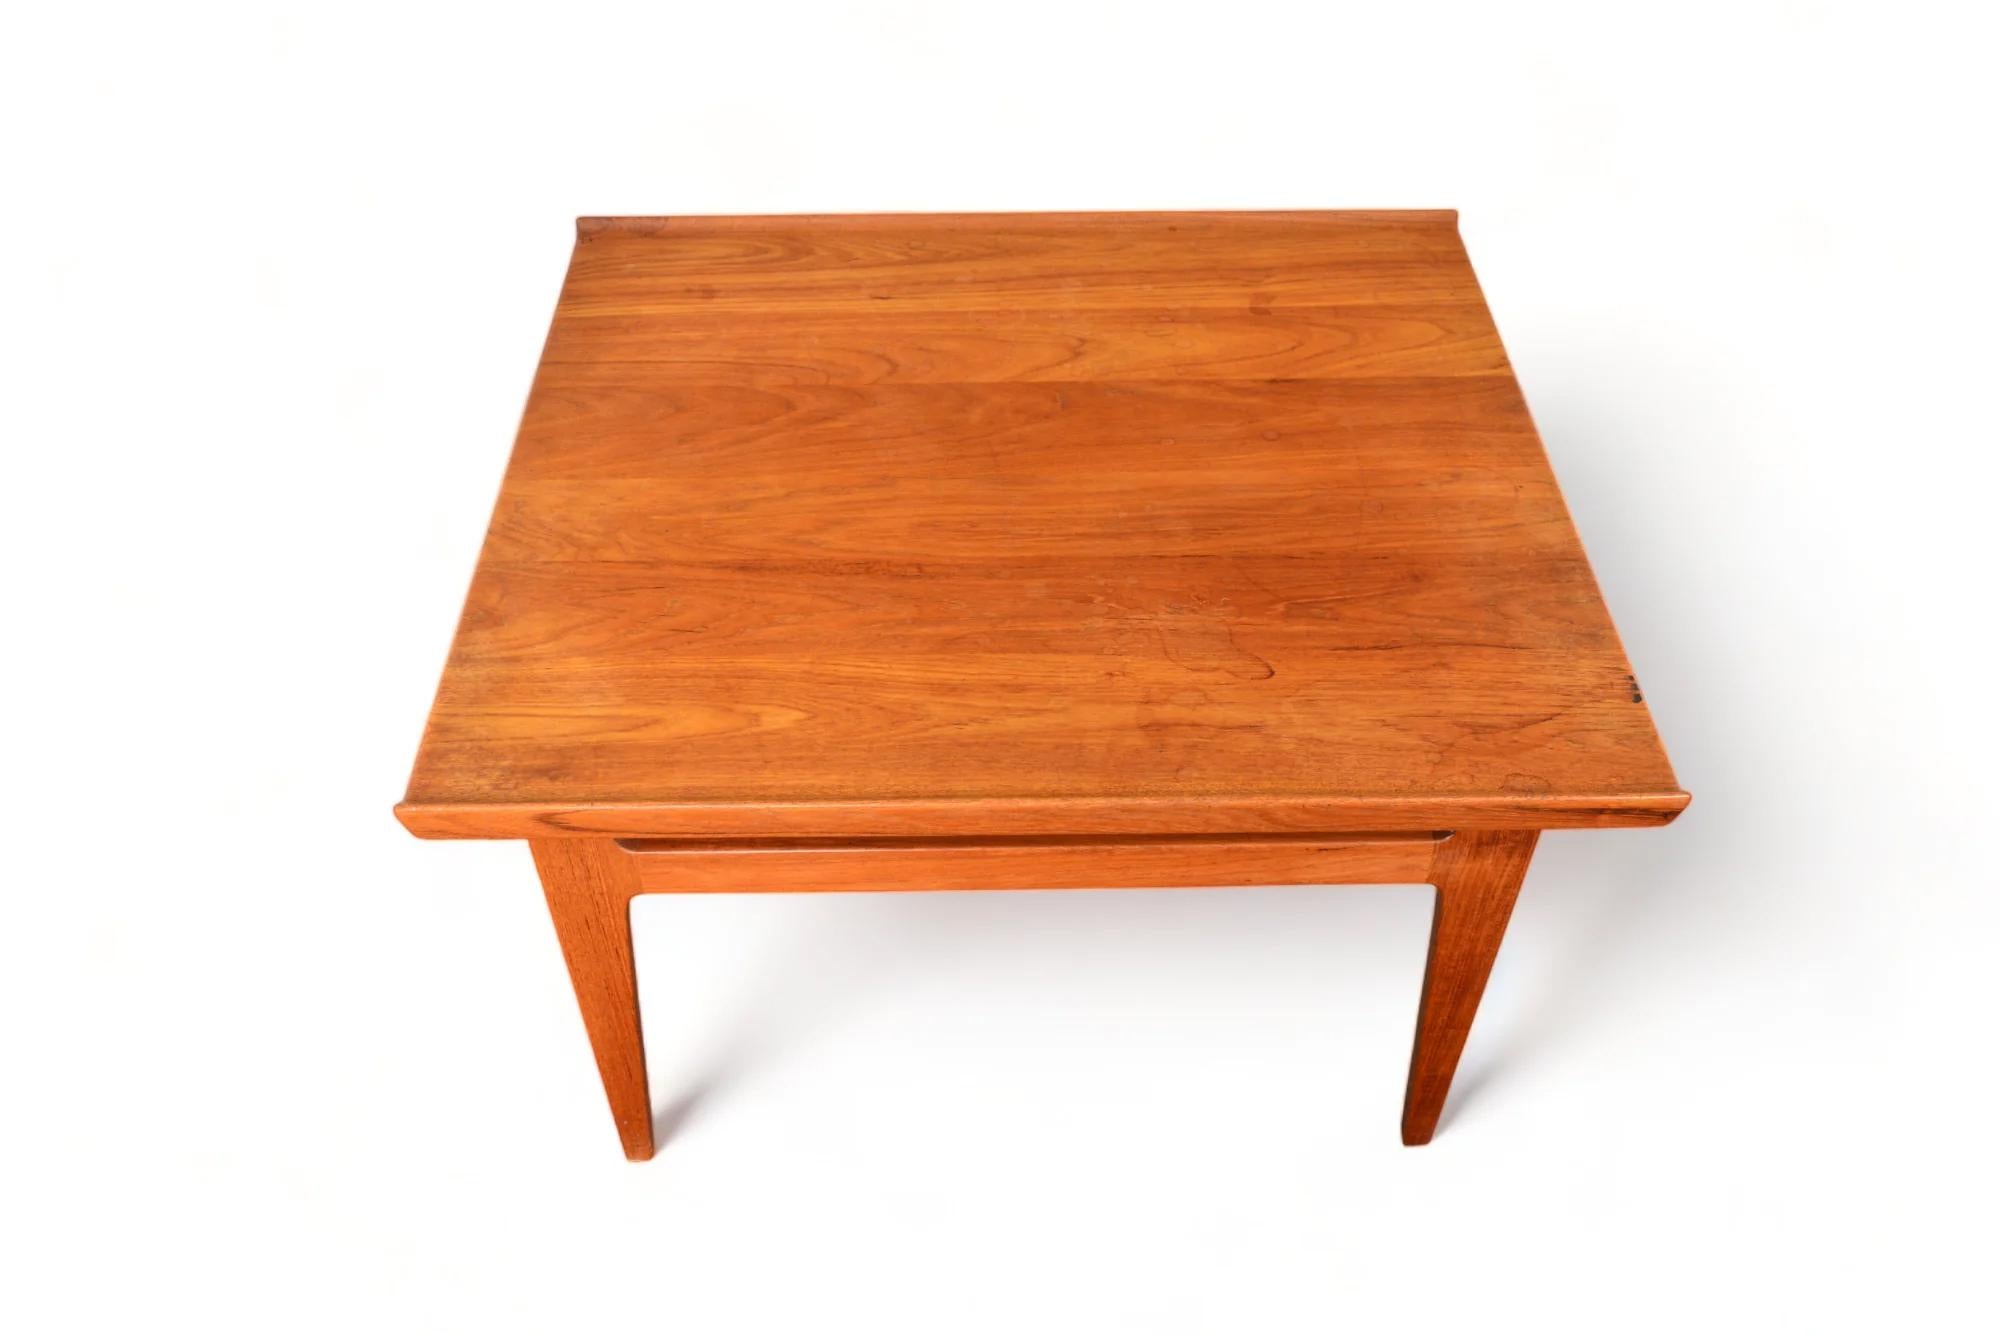 Square Solid Teak Coffee Table By Finn Juhl In Good Condition For Sale In Berkeley, CA